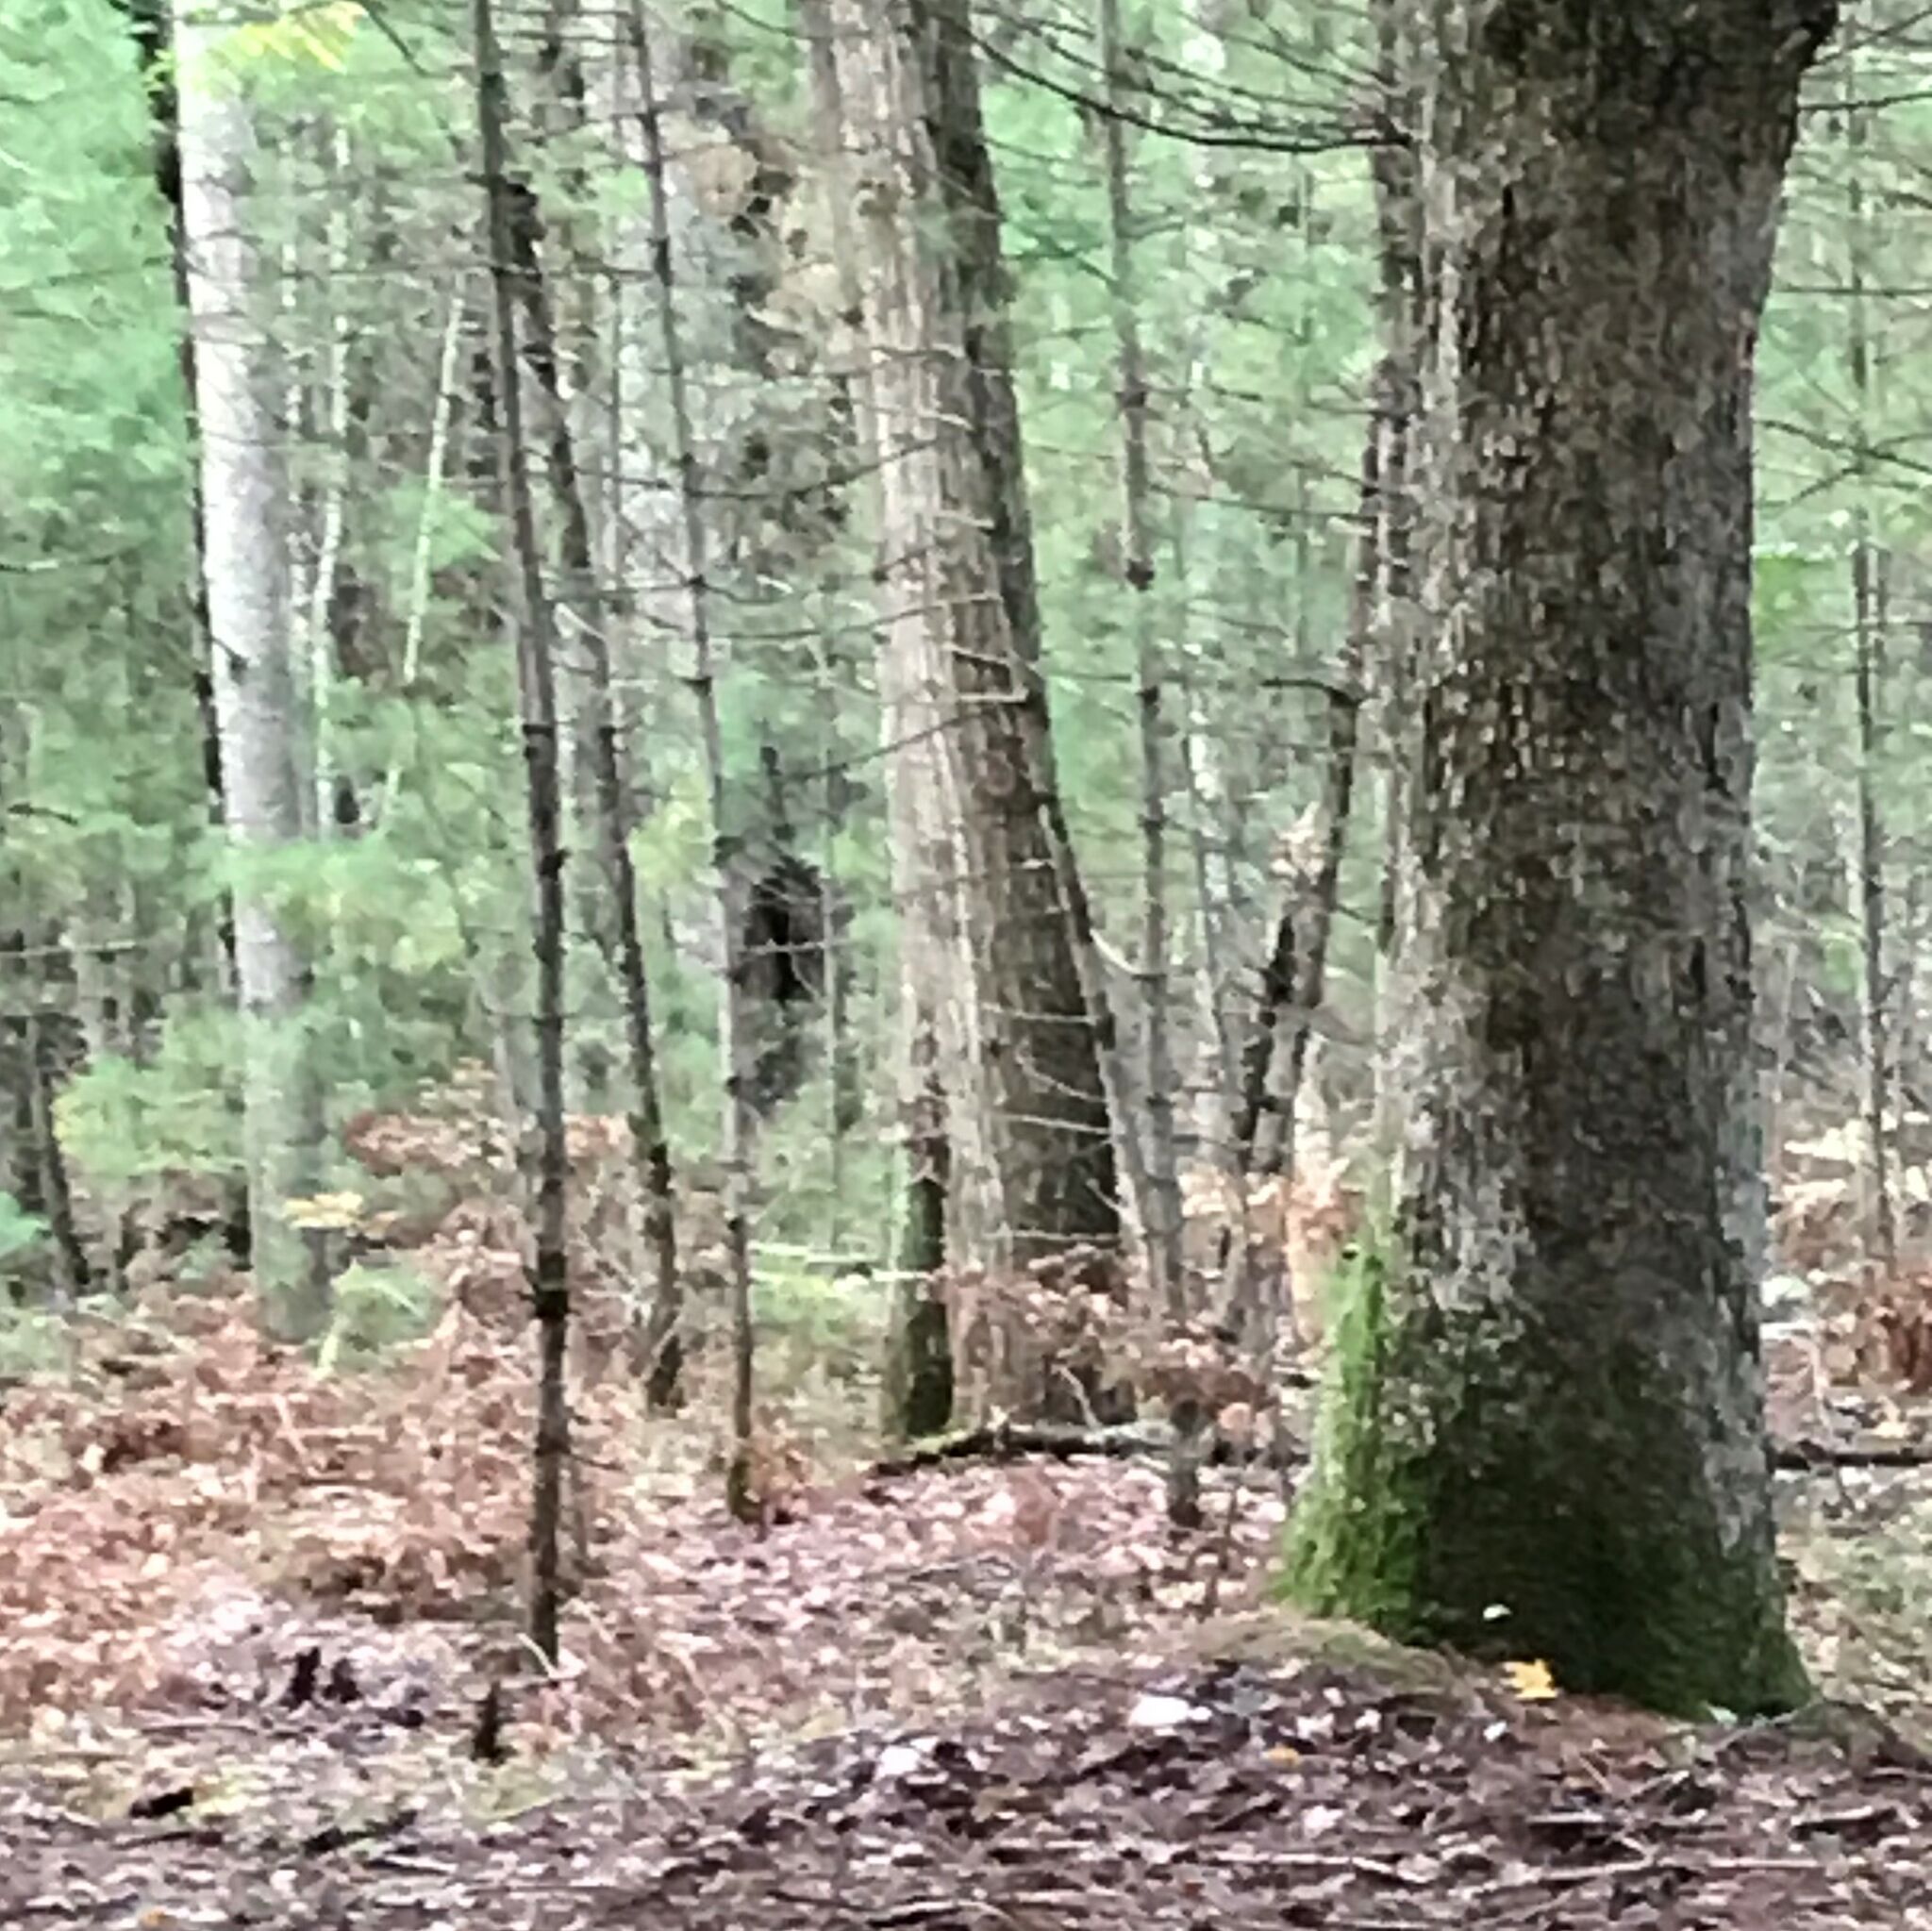 Michigan State Police: Have you seen Bigfoot?